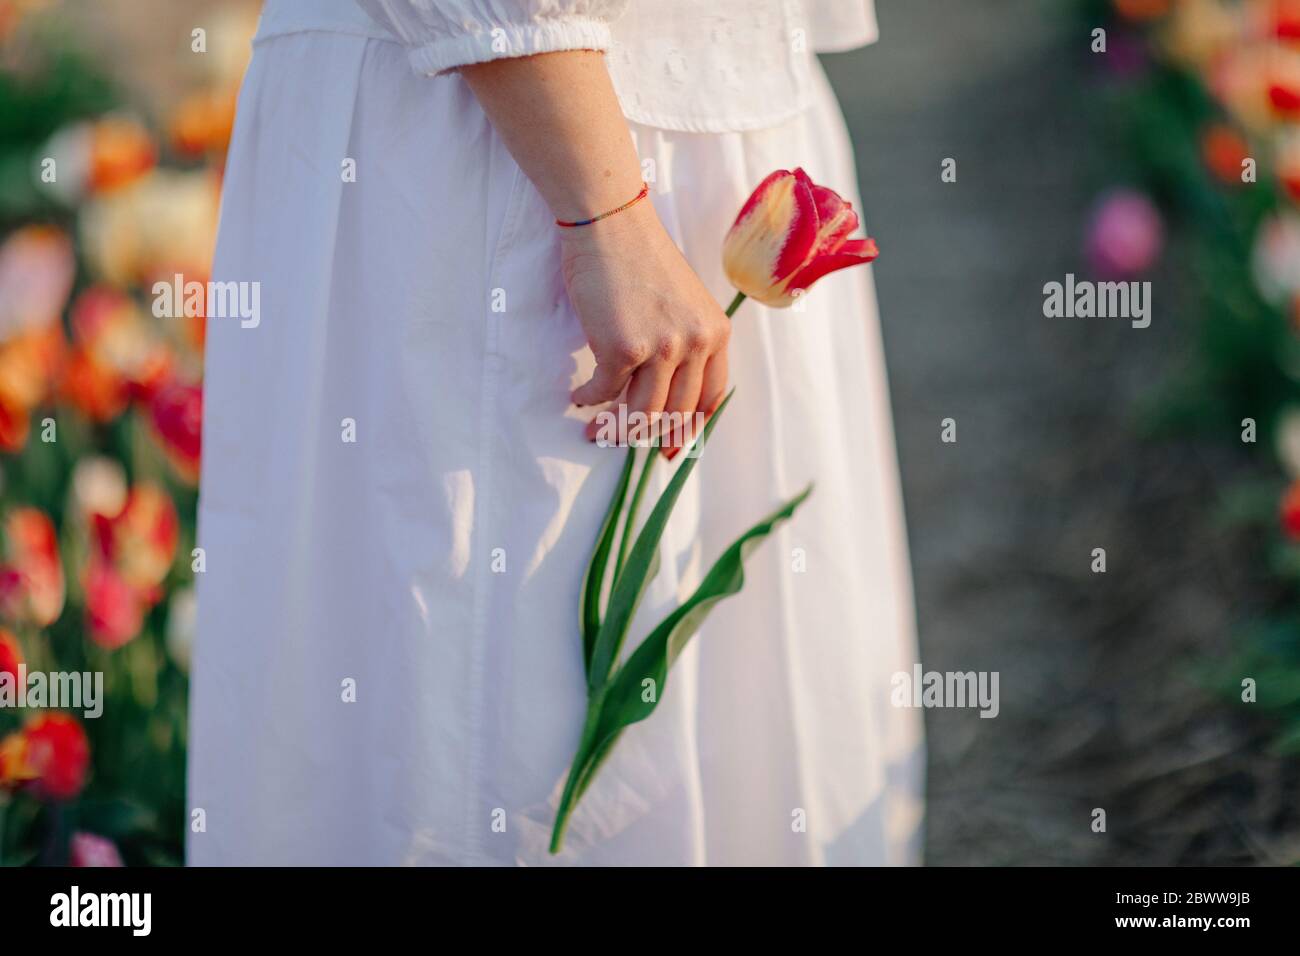 Crop view of woman standing in  tulip field holding single tulip Stock Photo